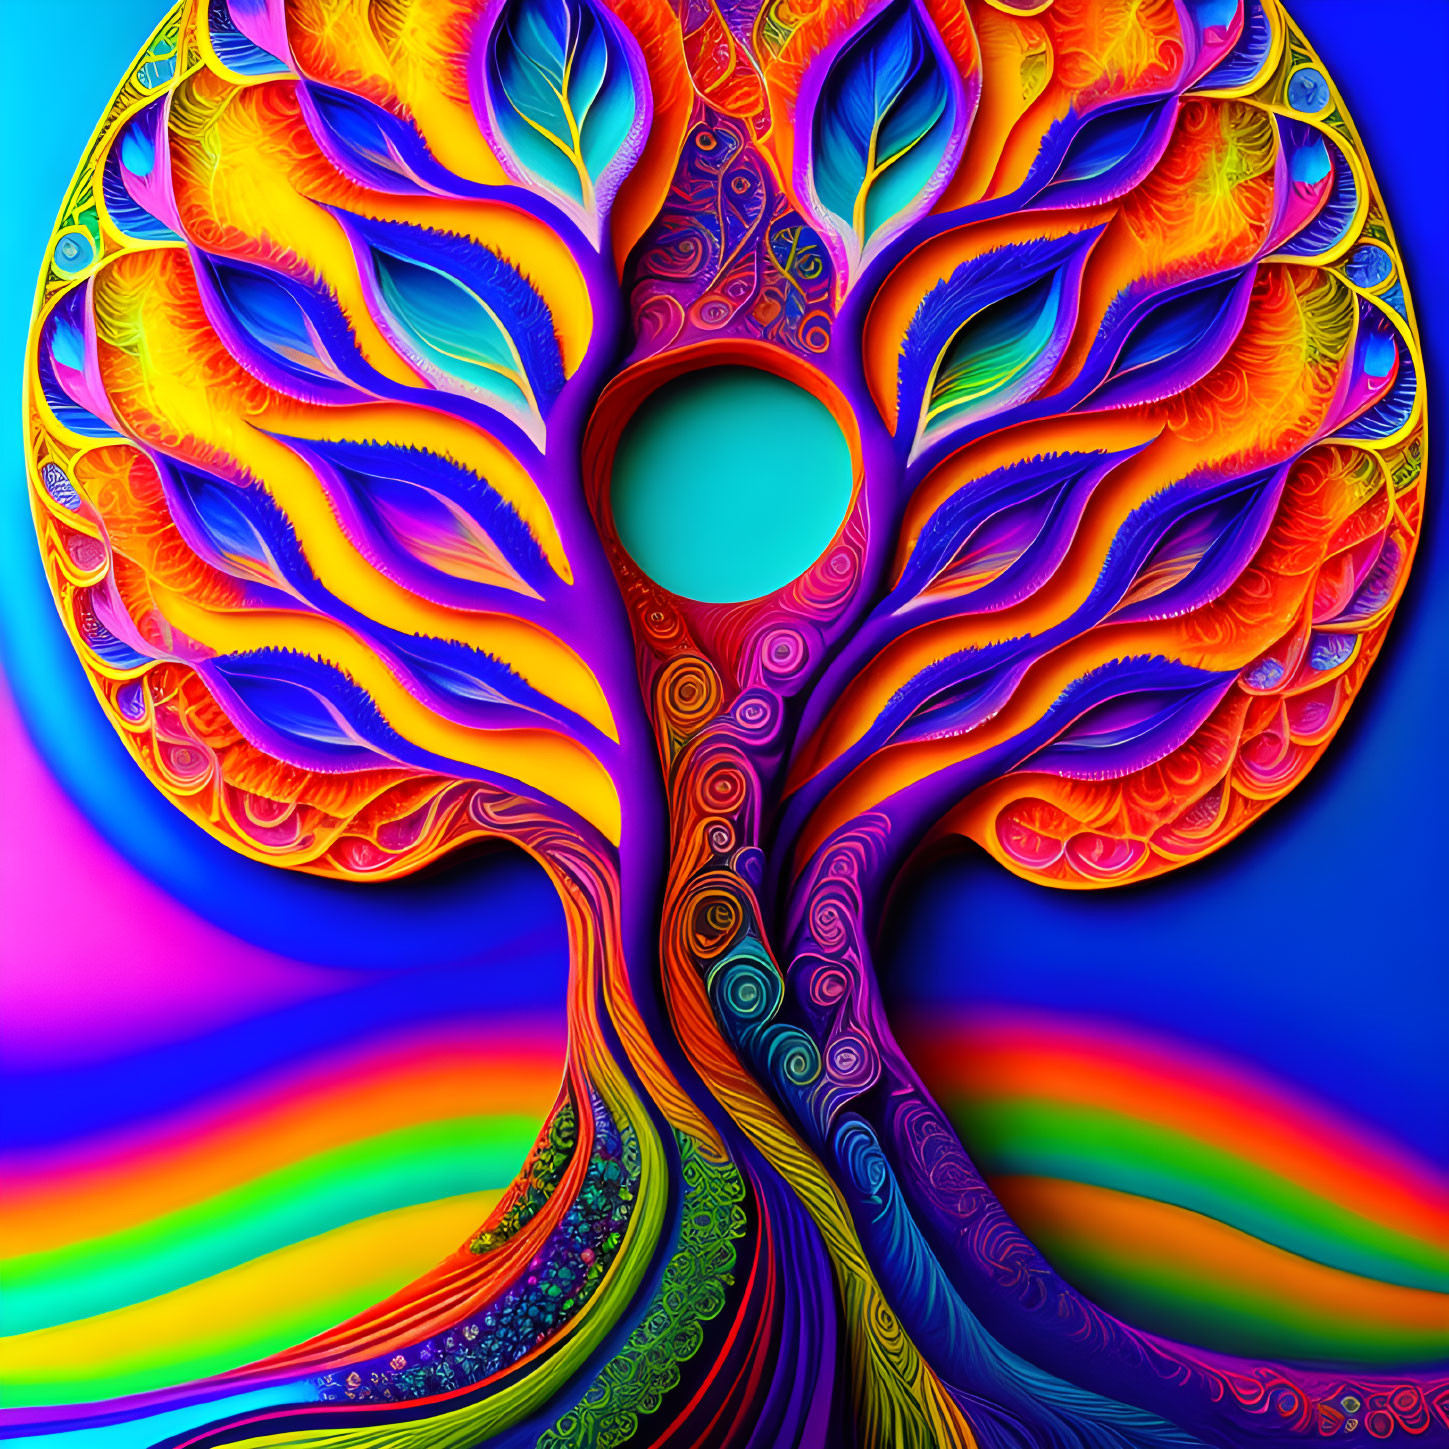 Colorful psychedelic tree illustration on blue background